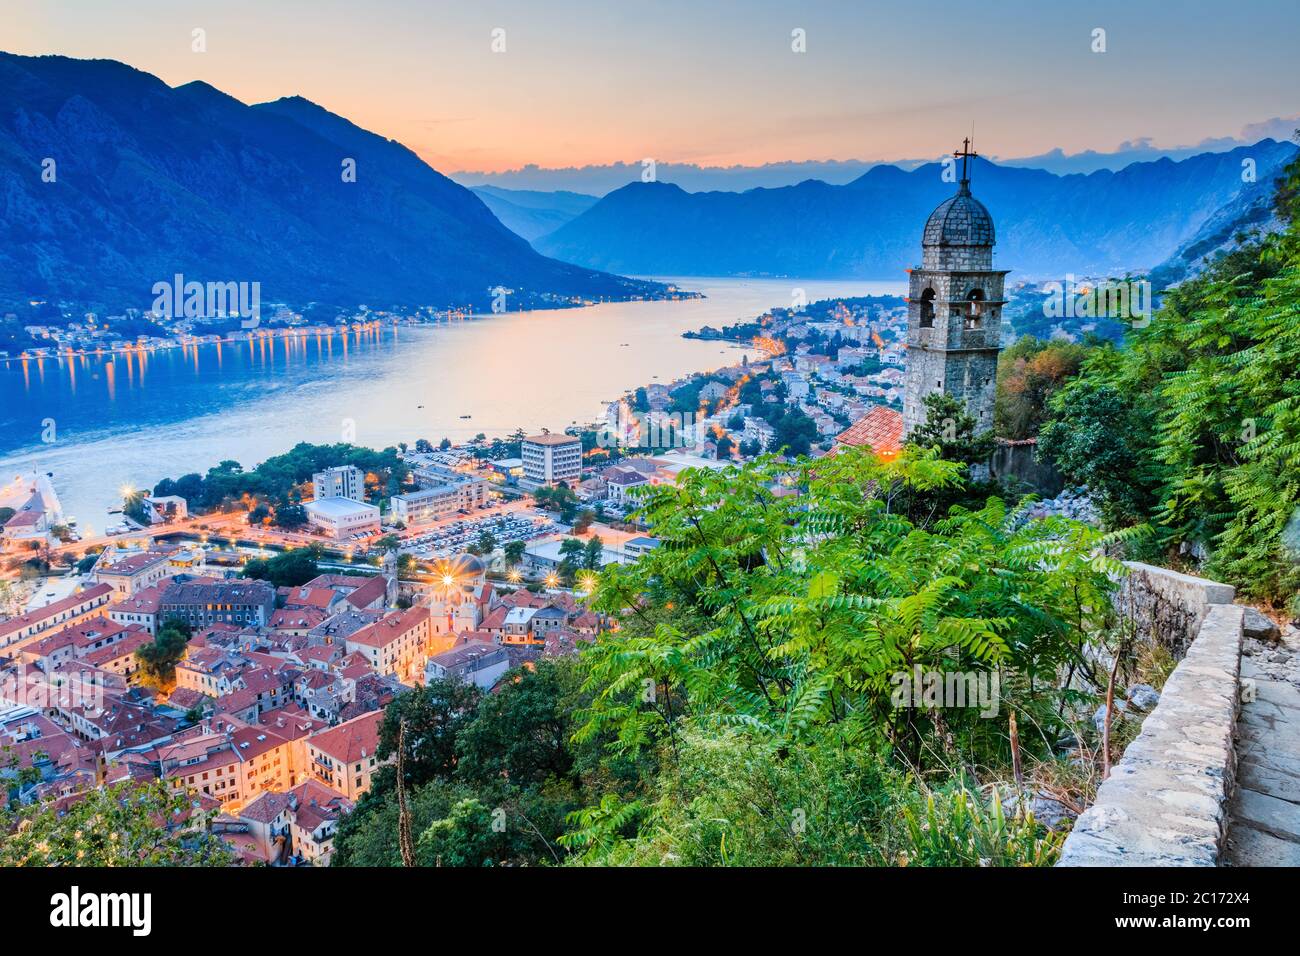 Kotor, Montenegro. Aerial view of Kotor Bay and Old Town at sunset. Stock Photo